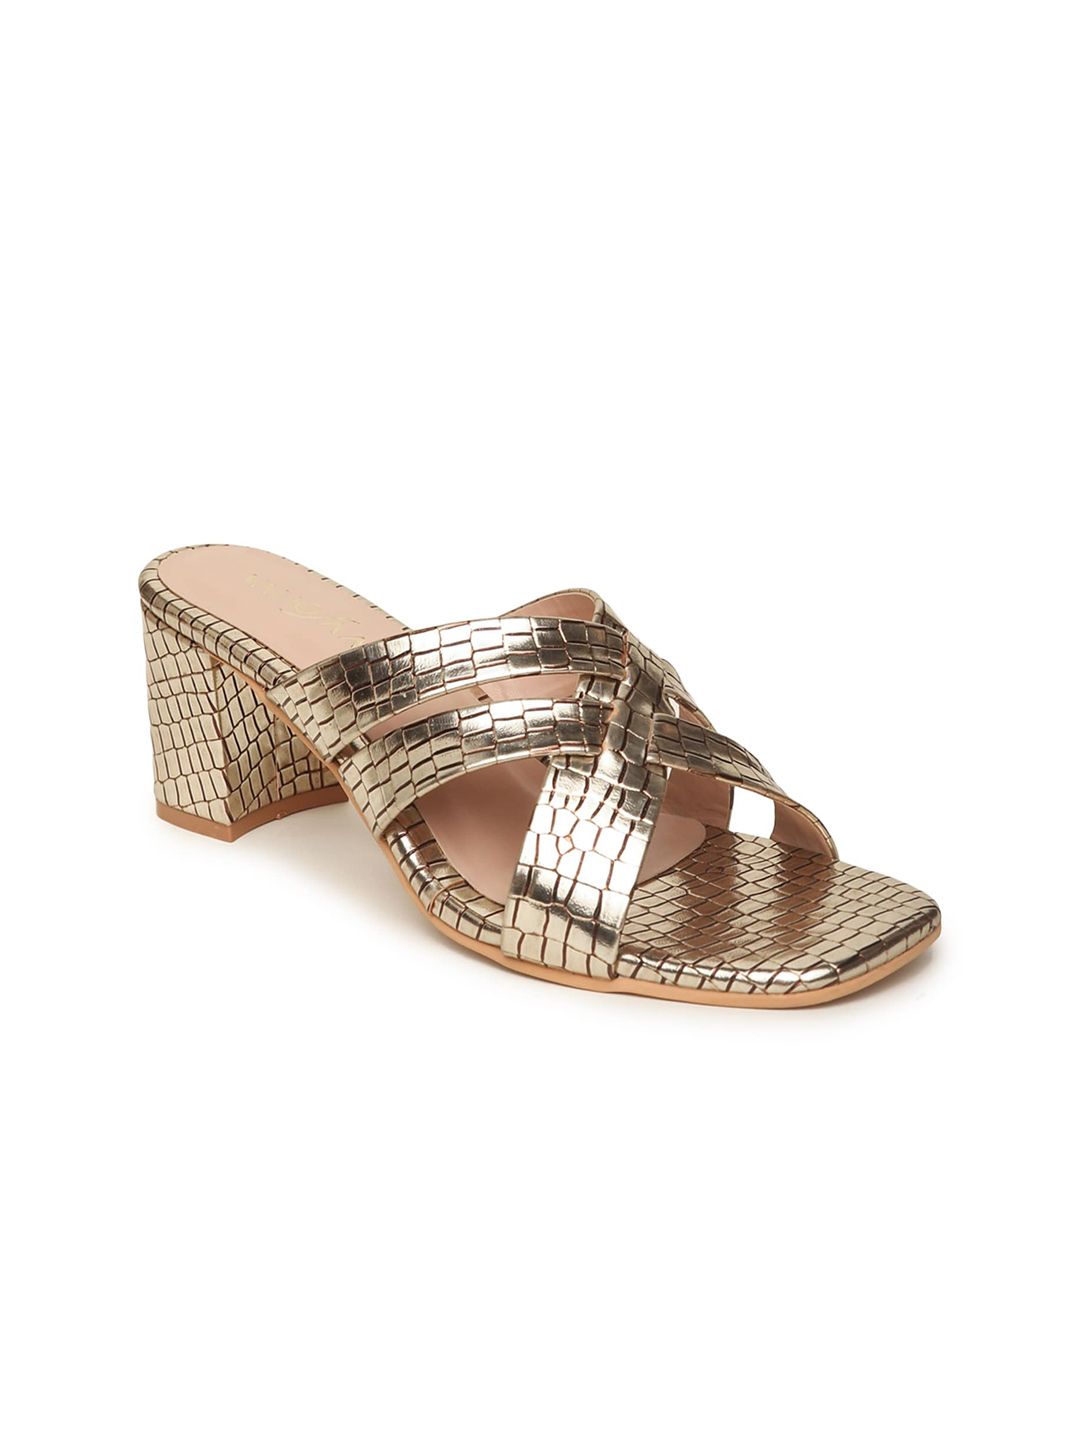 VALIOSAA Gold-Toned Party Block Sandals Price in India